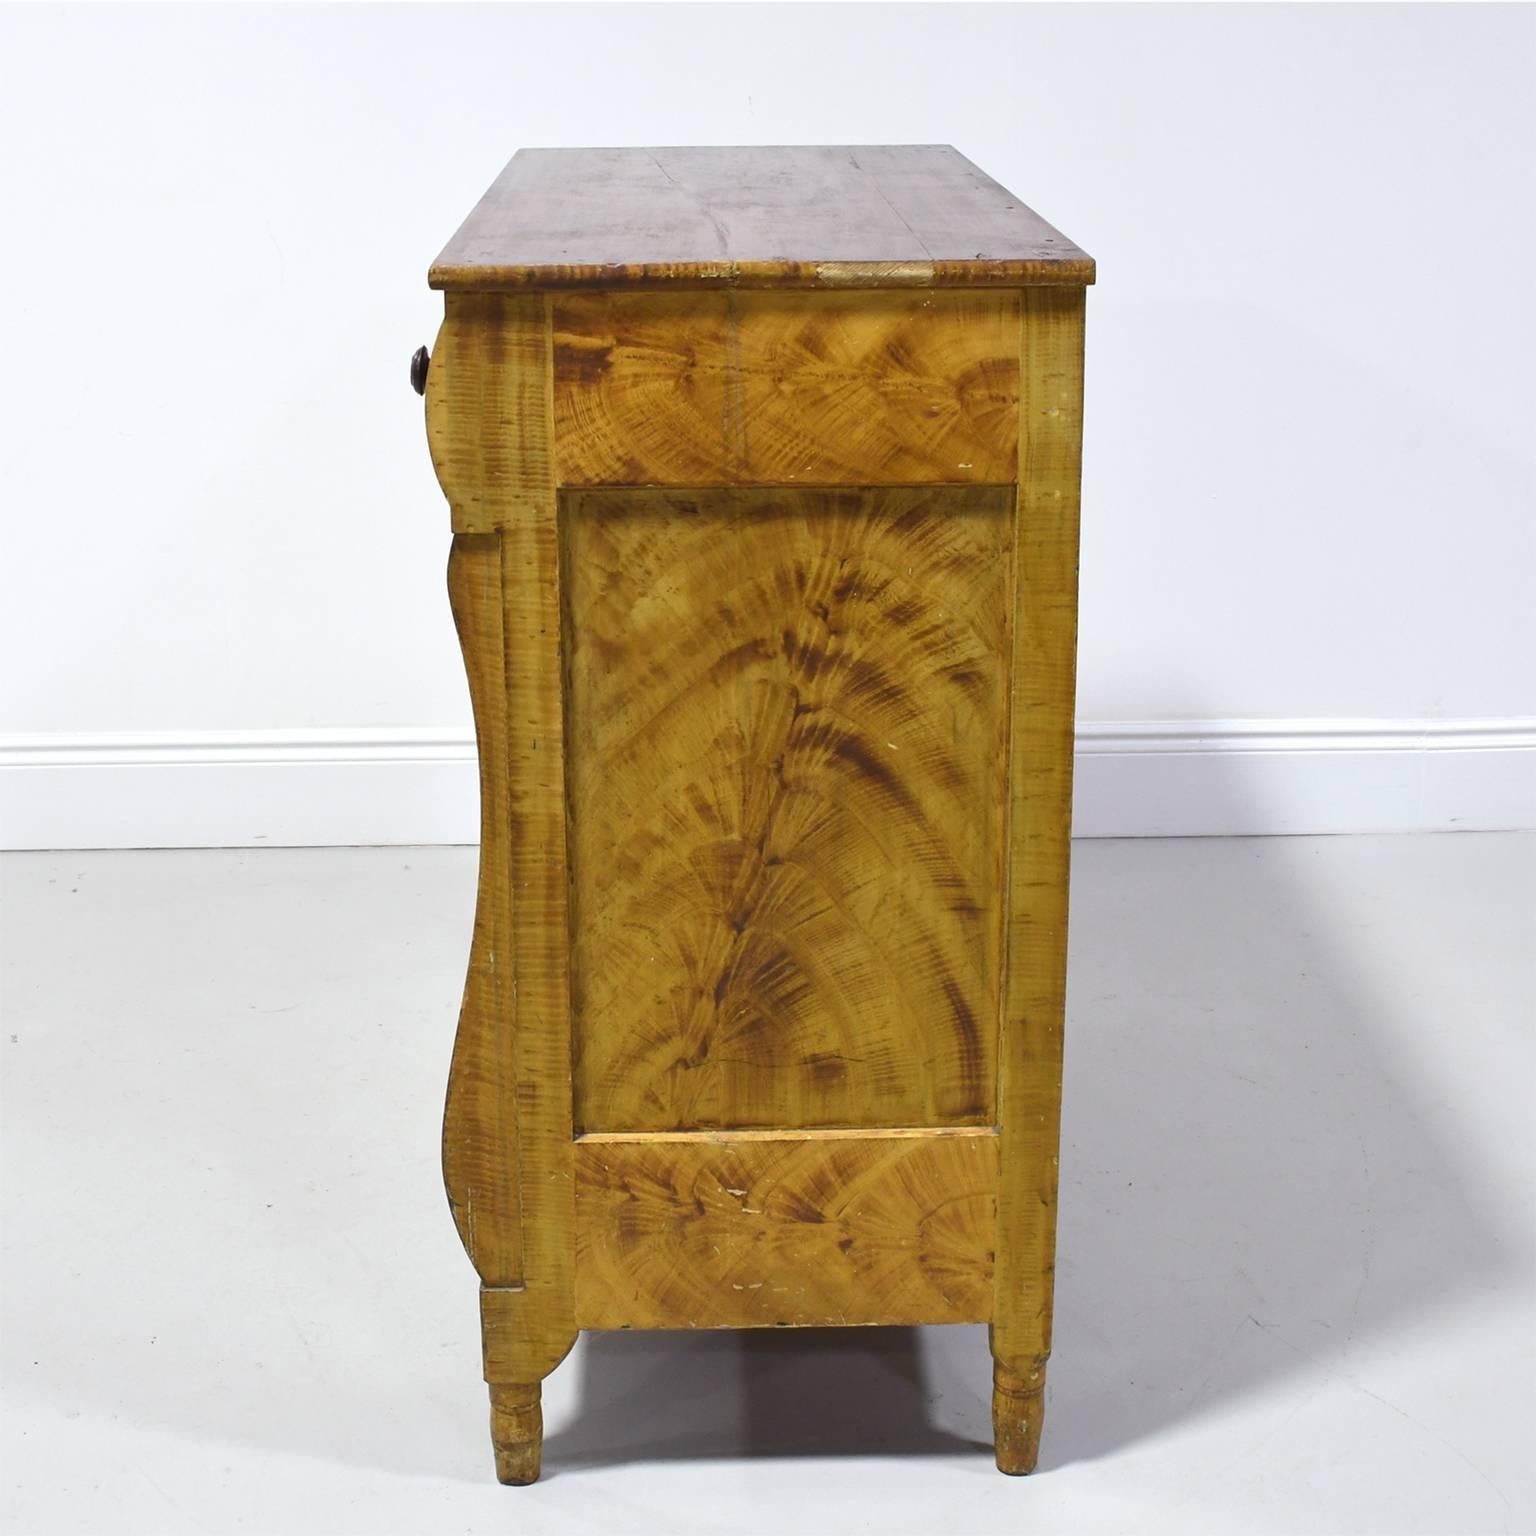 Polychromed Lancaster County American Empire Faux-Grained Chest of Drawers, circa 1830